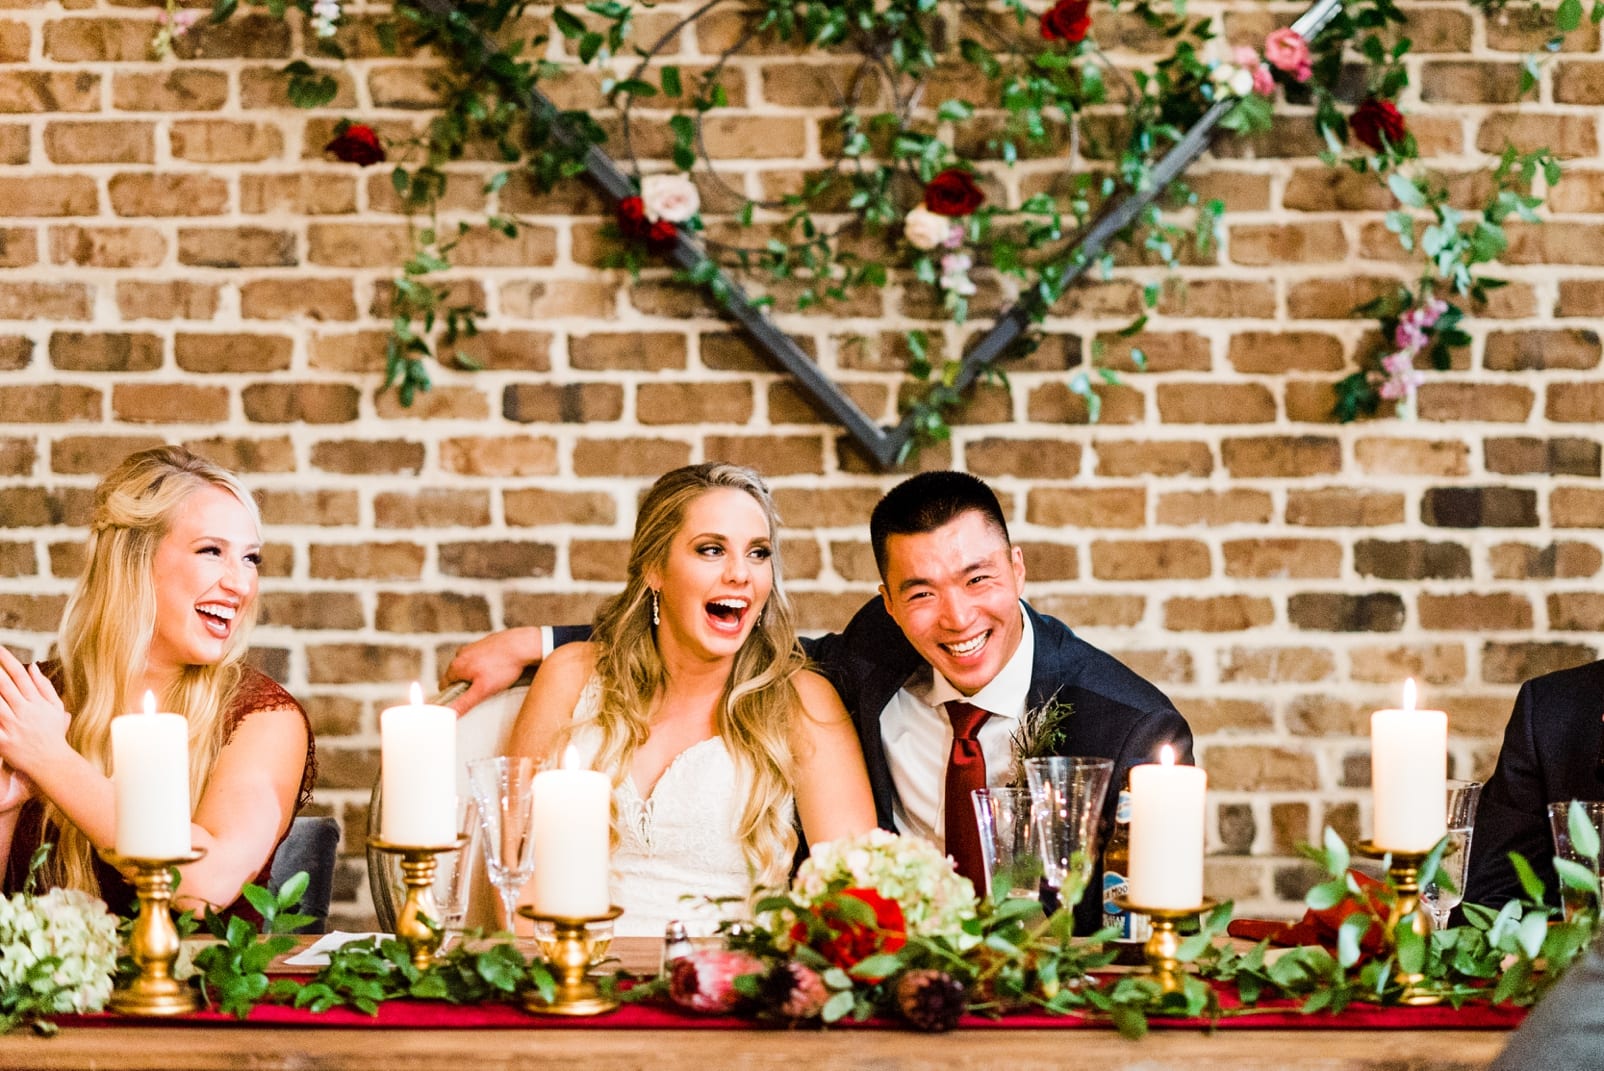 sutherland estate wedding photographer wedding reception head table inspiration bride and groom laughing photo